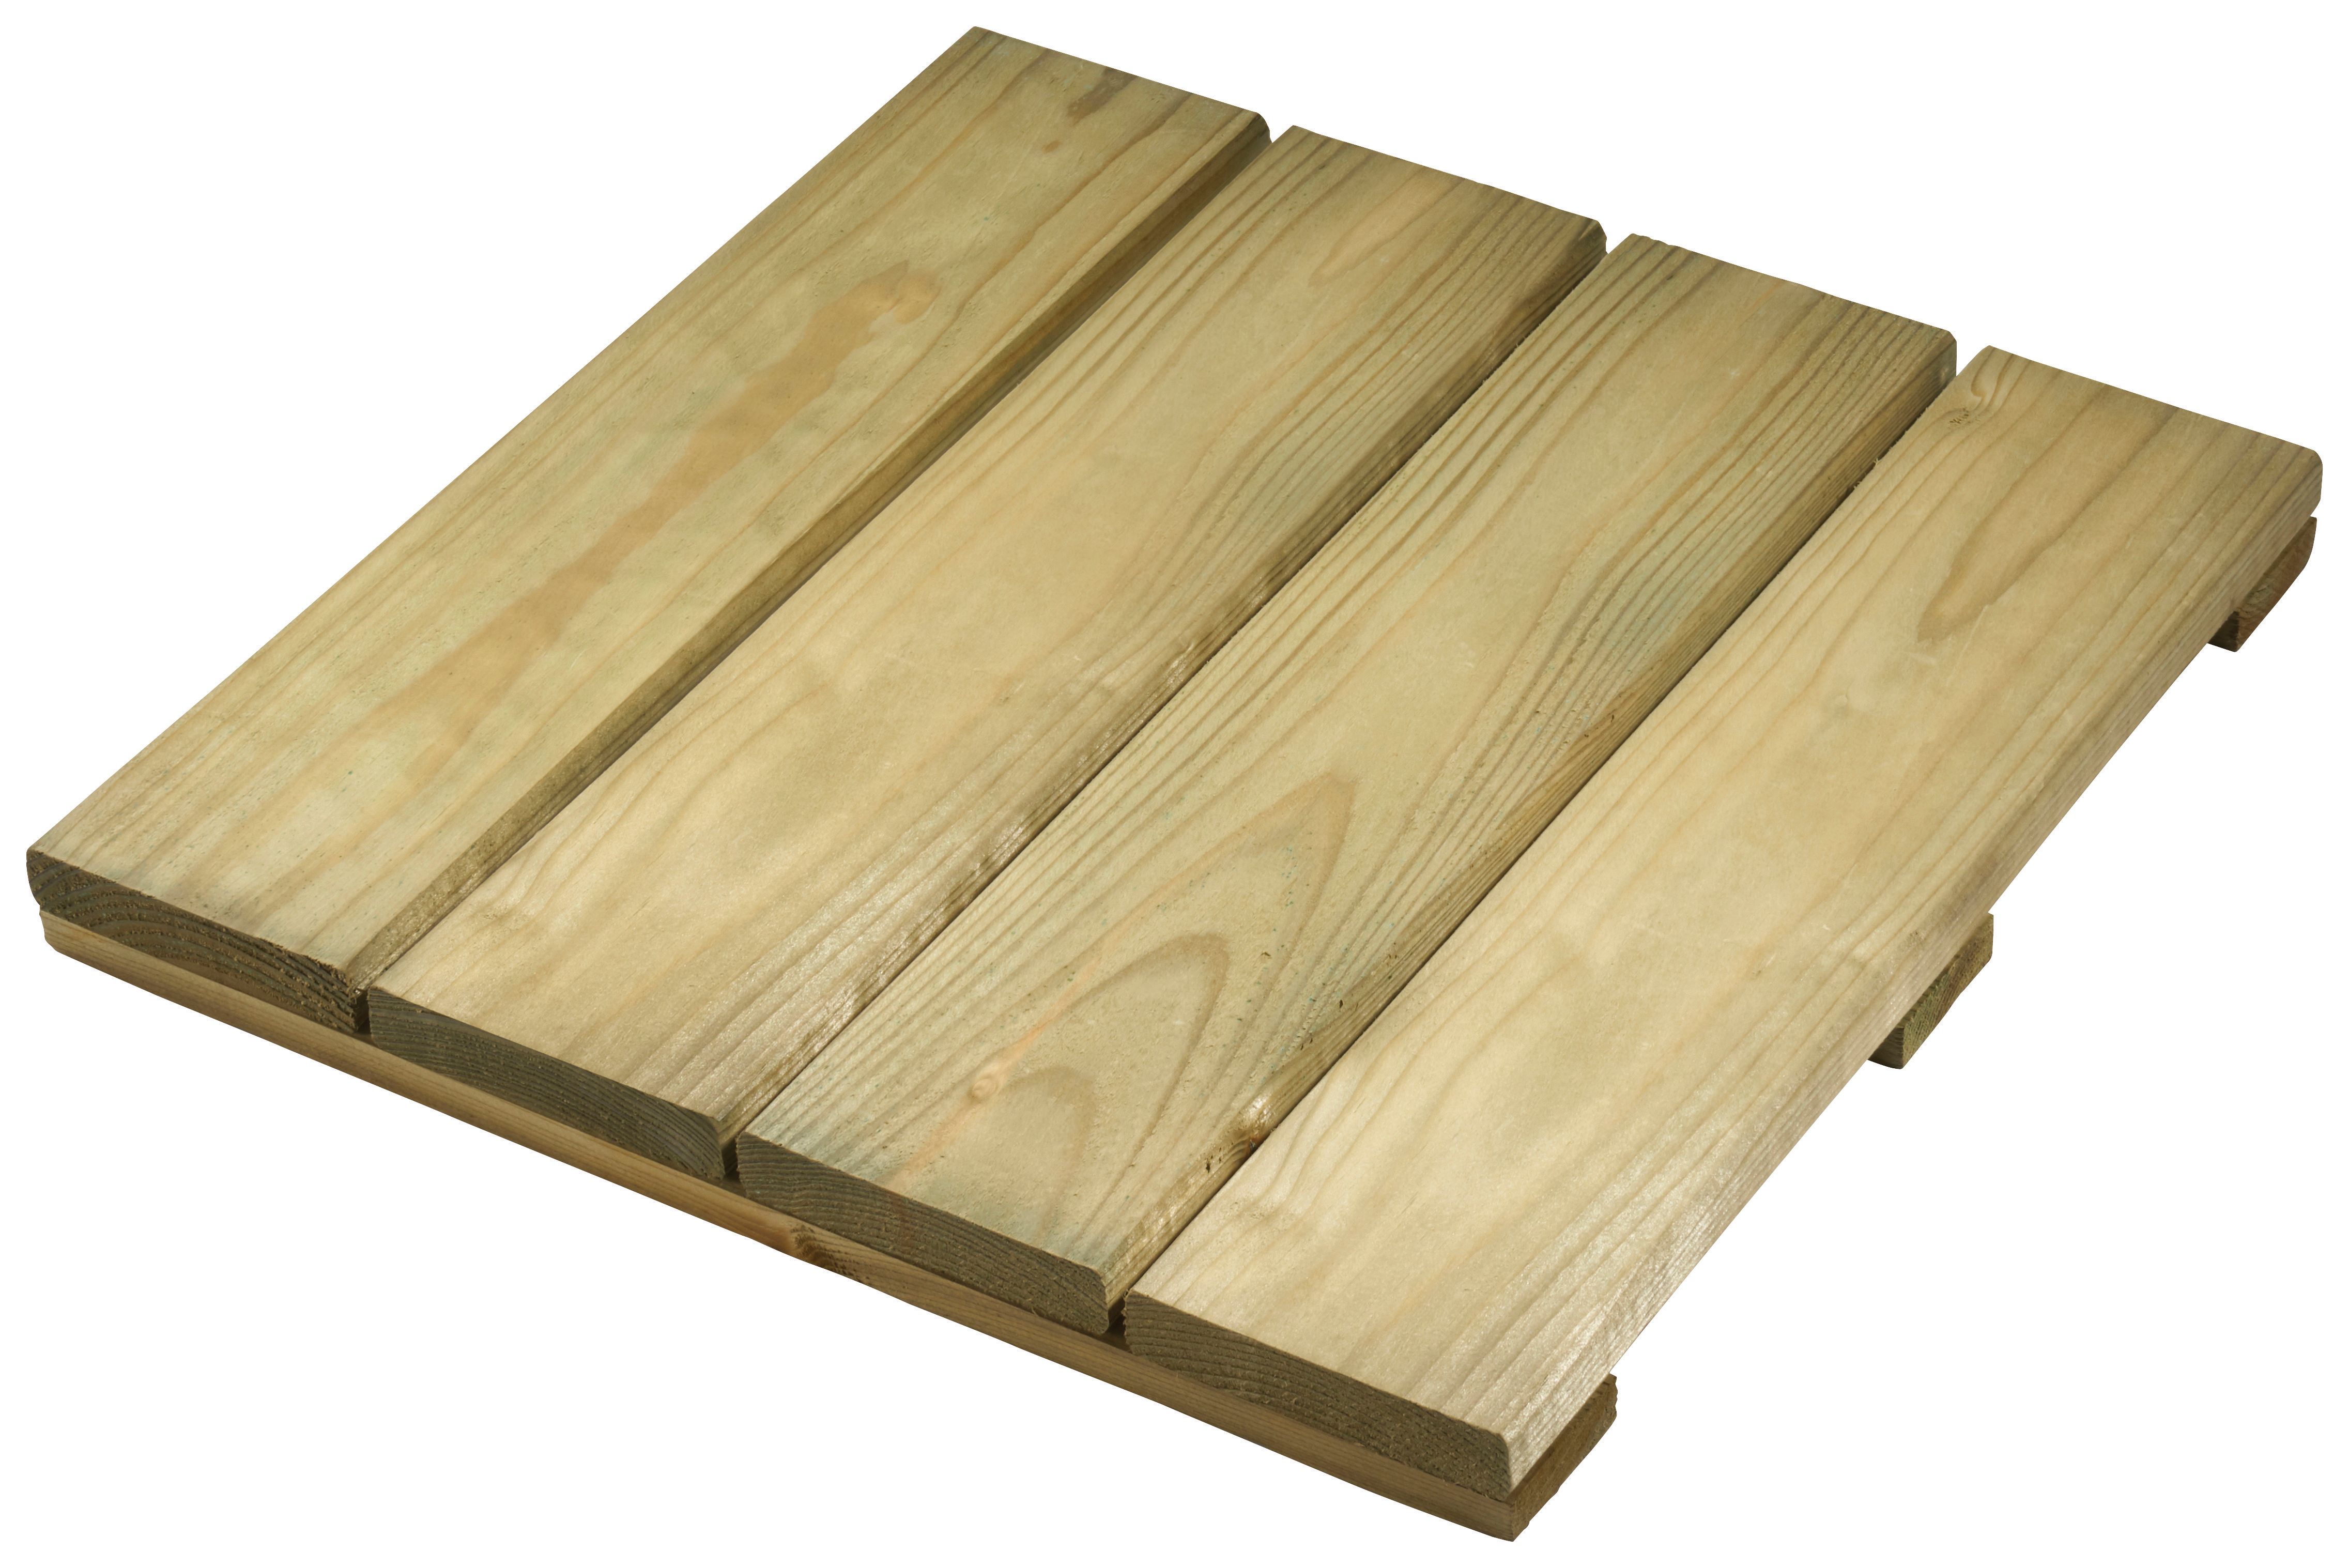 Image of Wickes Softwood Pine Deck Tile - 32 x 400 x 400mm